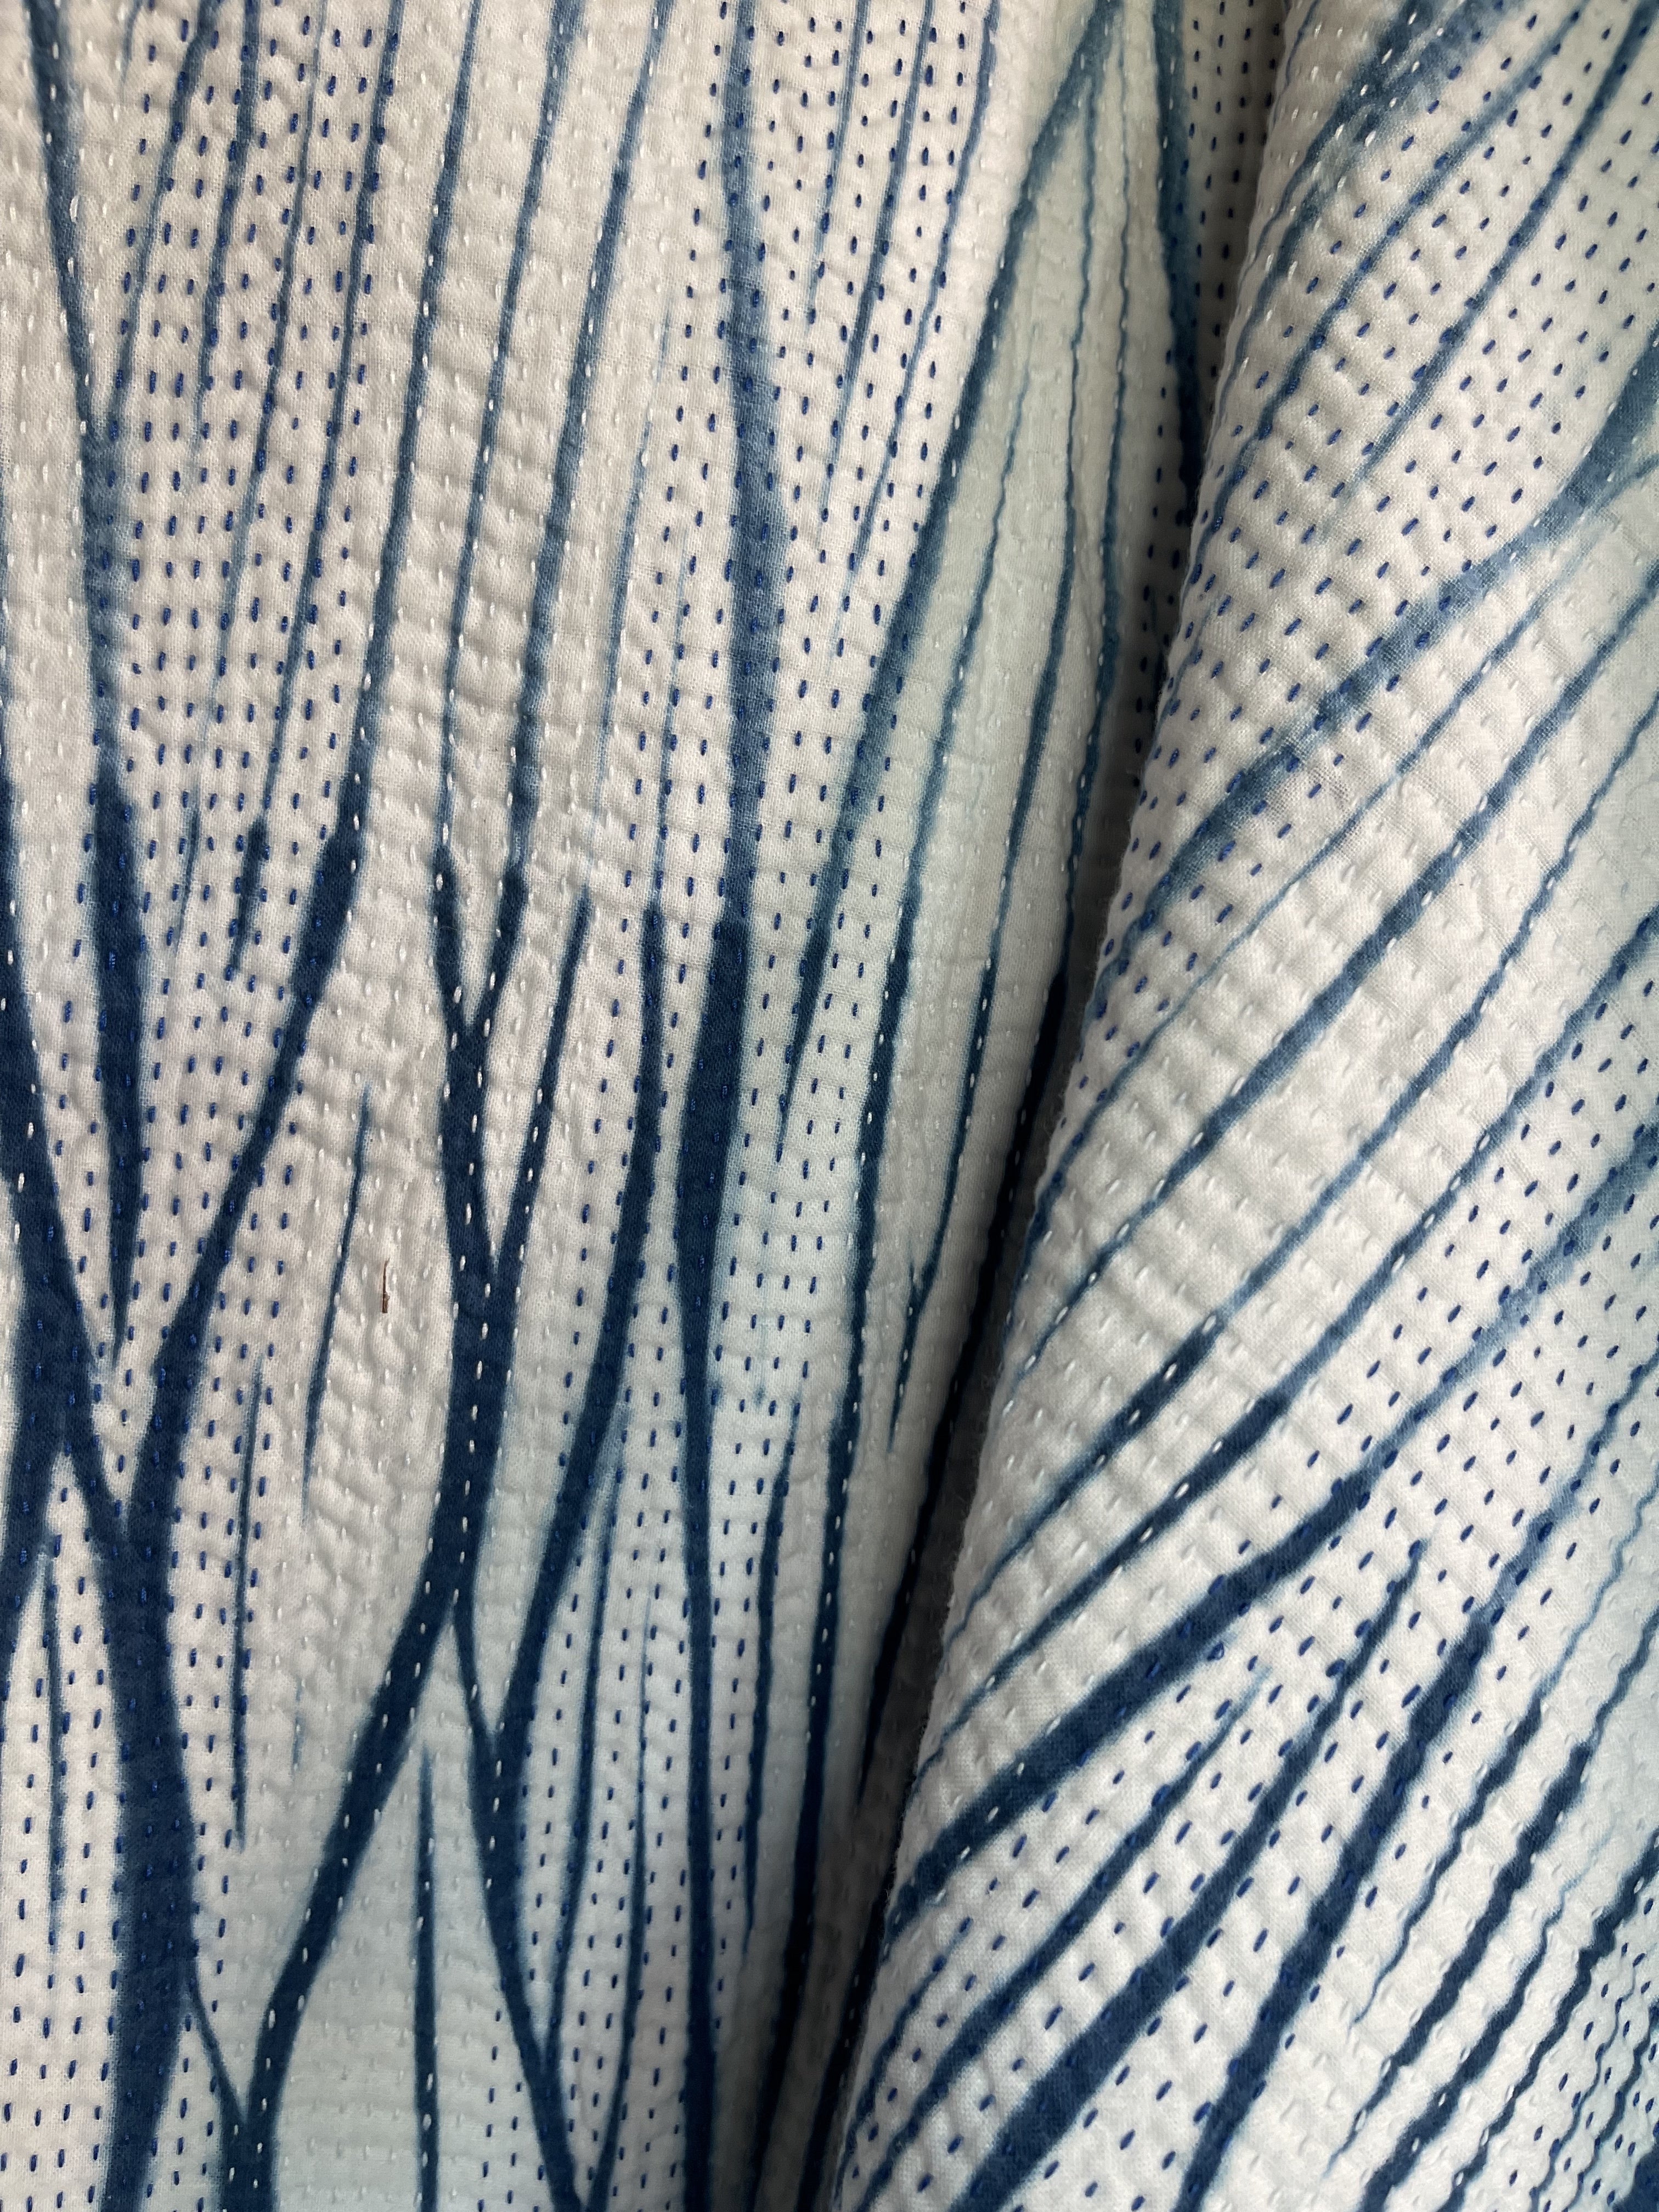 A sunningly beautiful indigo shibori kantha quilt,  made by the artisans of LIVING BLUE. The front a graded vertical shibori pattern, in three diminshing panels of intensity of indiog blue; the reverse showing alternate fine white and blue hand stitiching resulting in a linear pattern of stripes - on a plain indigo background.